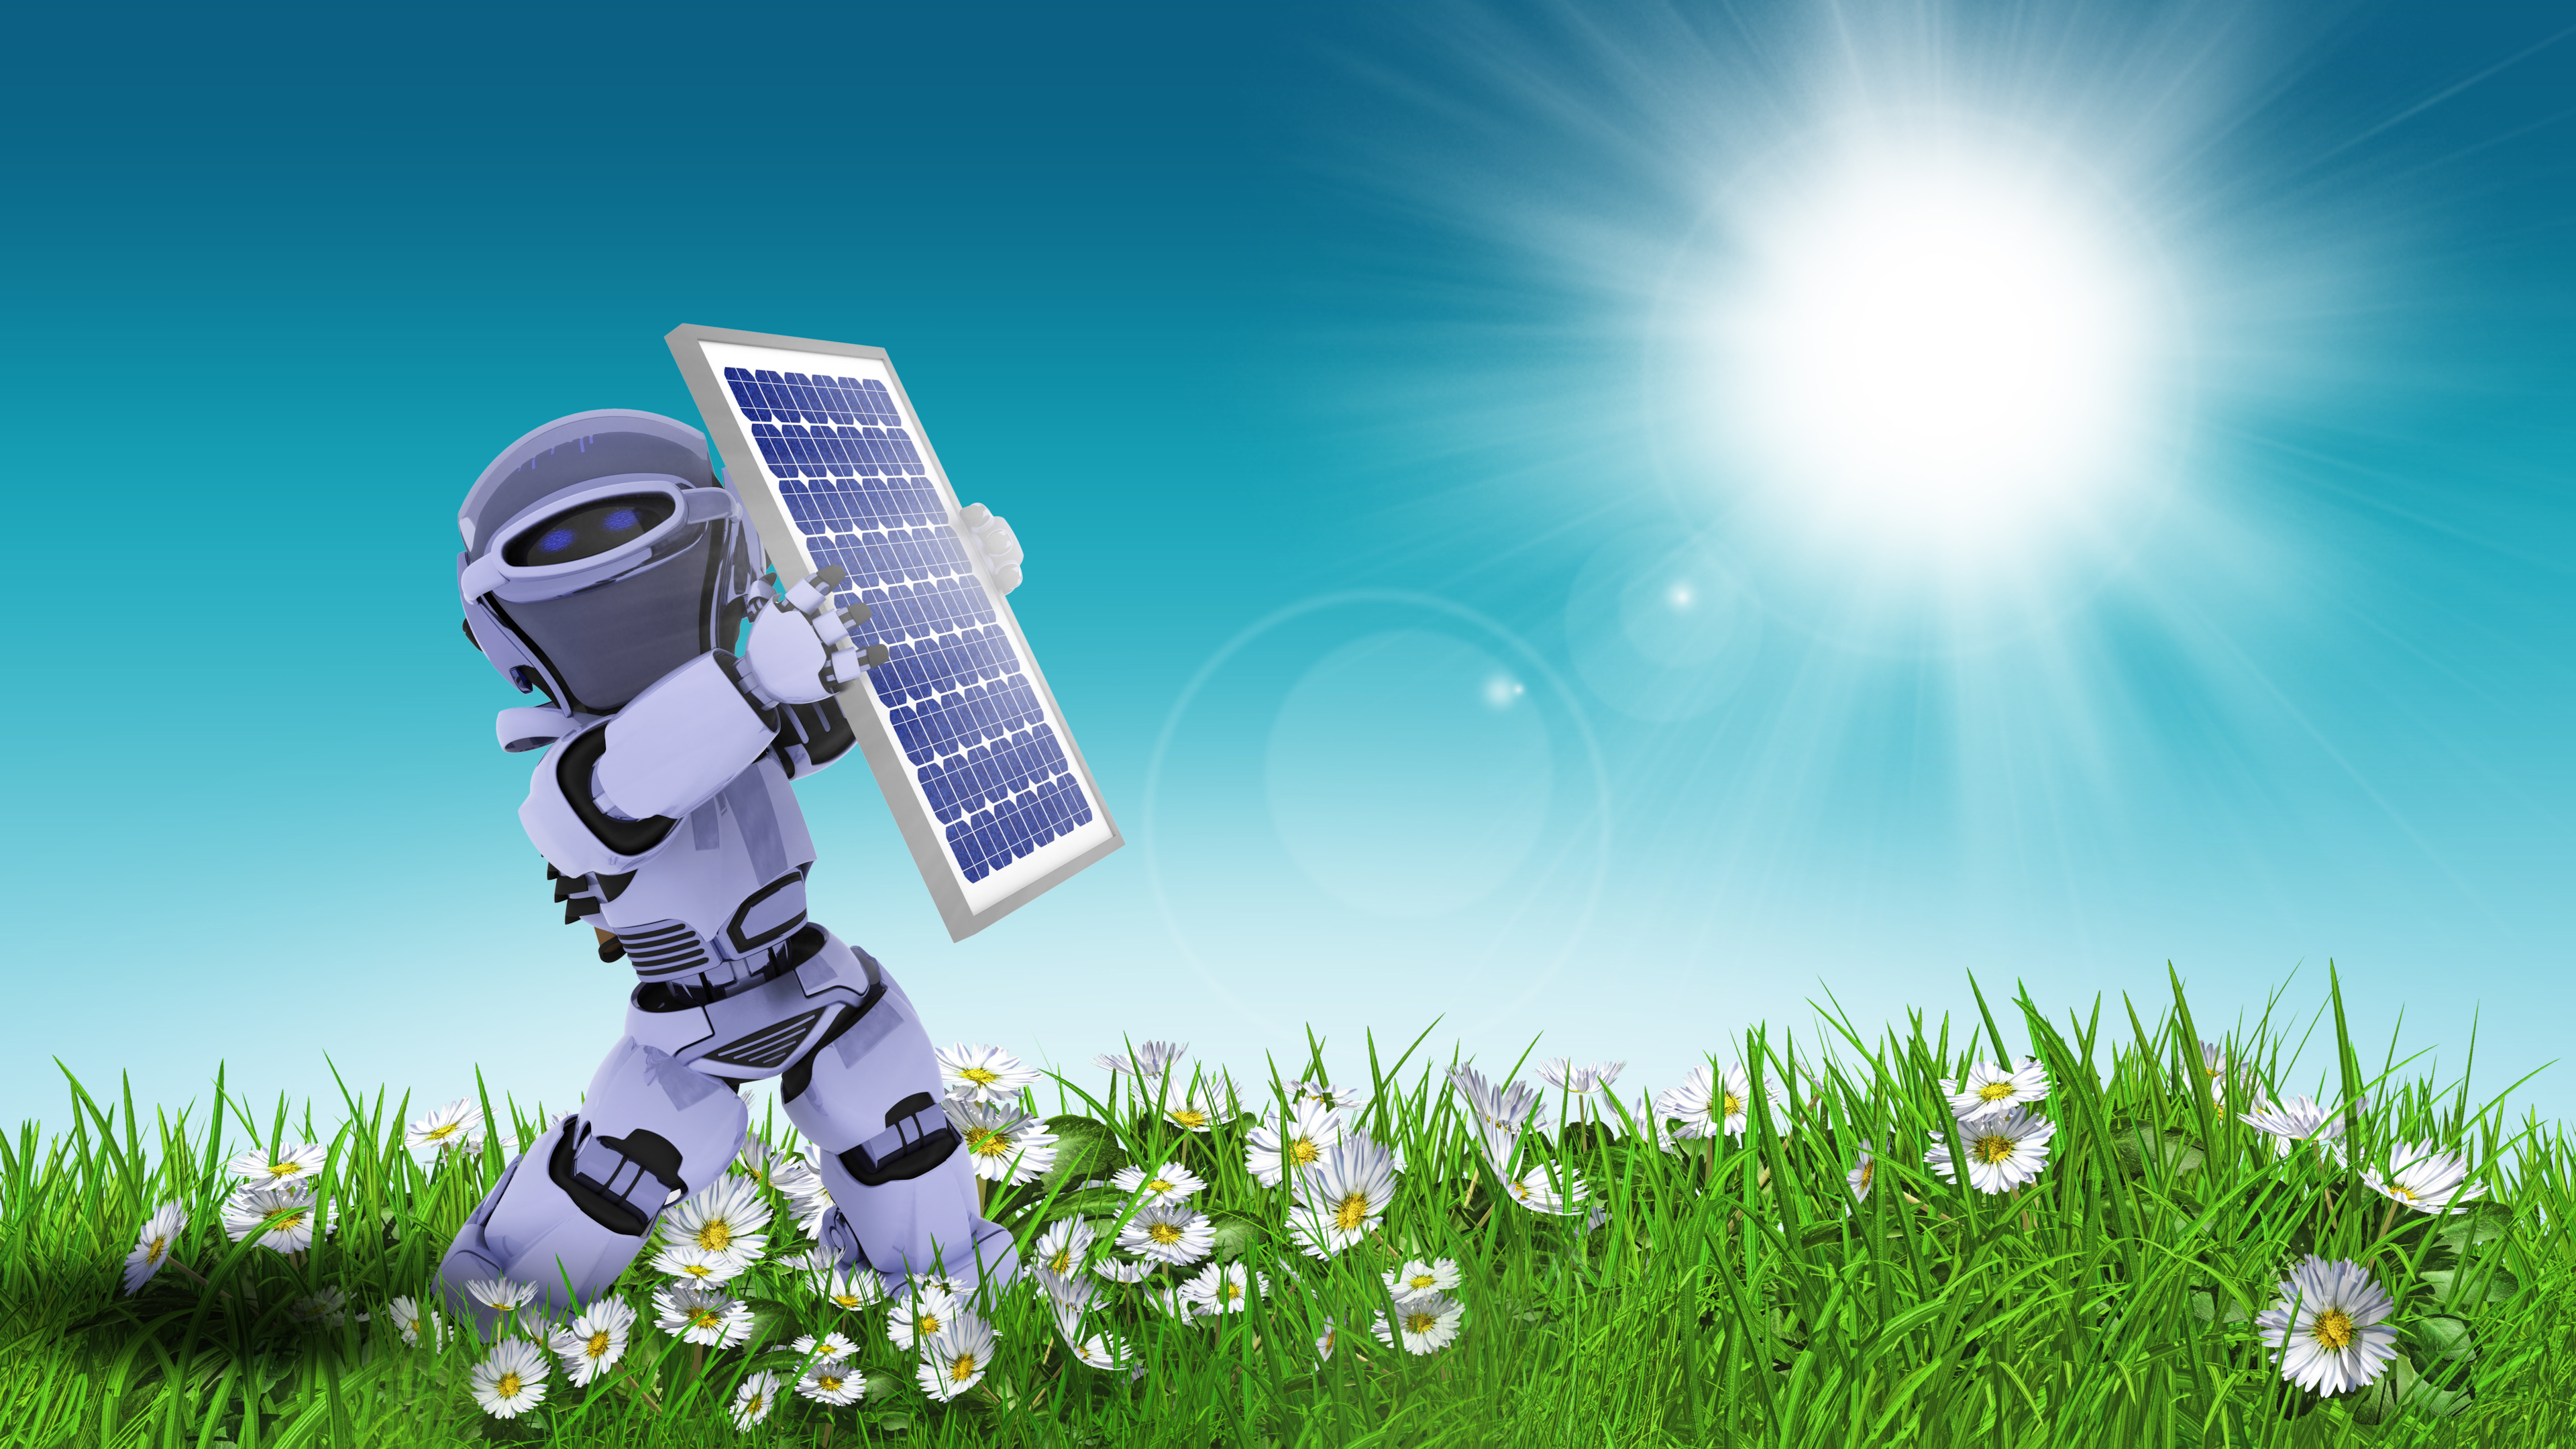 Doll stopping sun with solar panel